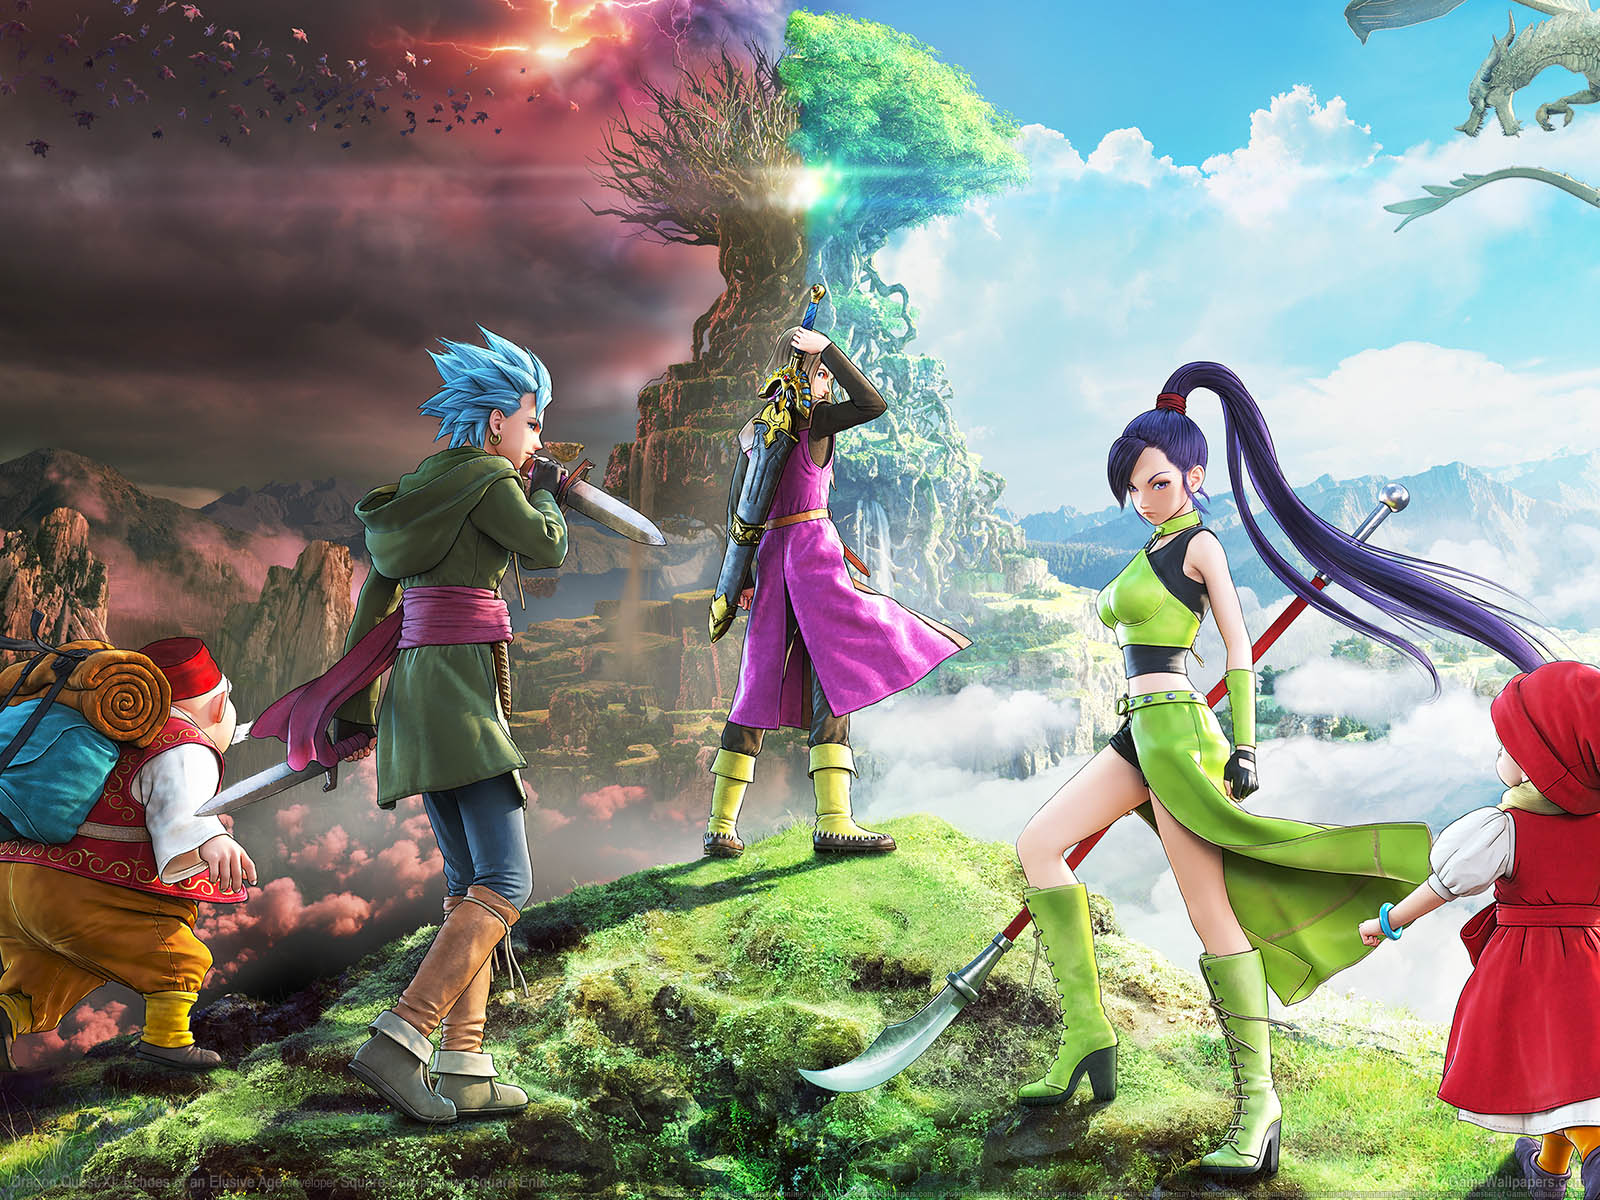 Dragon Quest XI: Echoes of an Elusive Ageνmmer=01 wallpaper  1600x1200